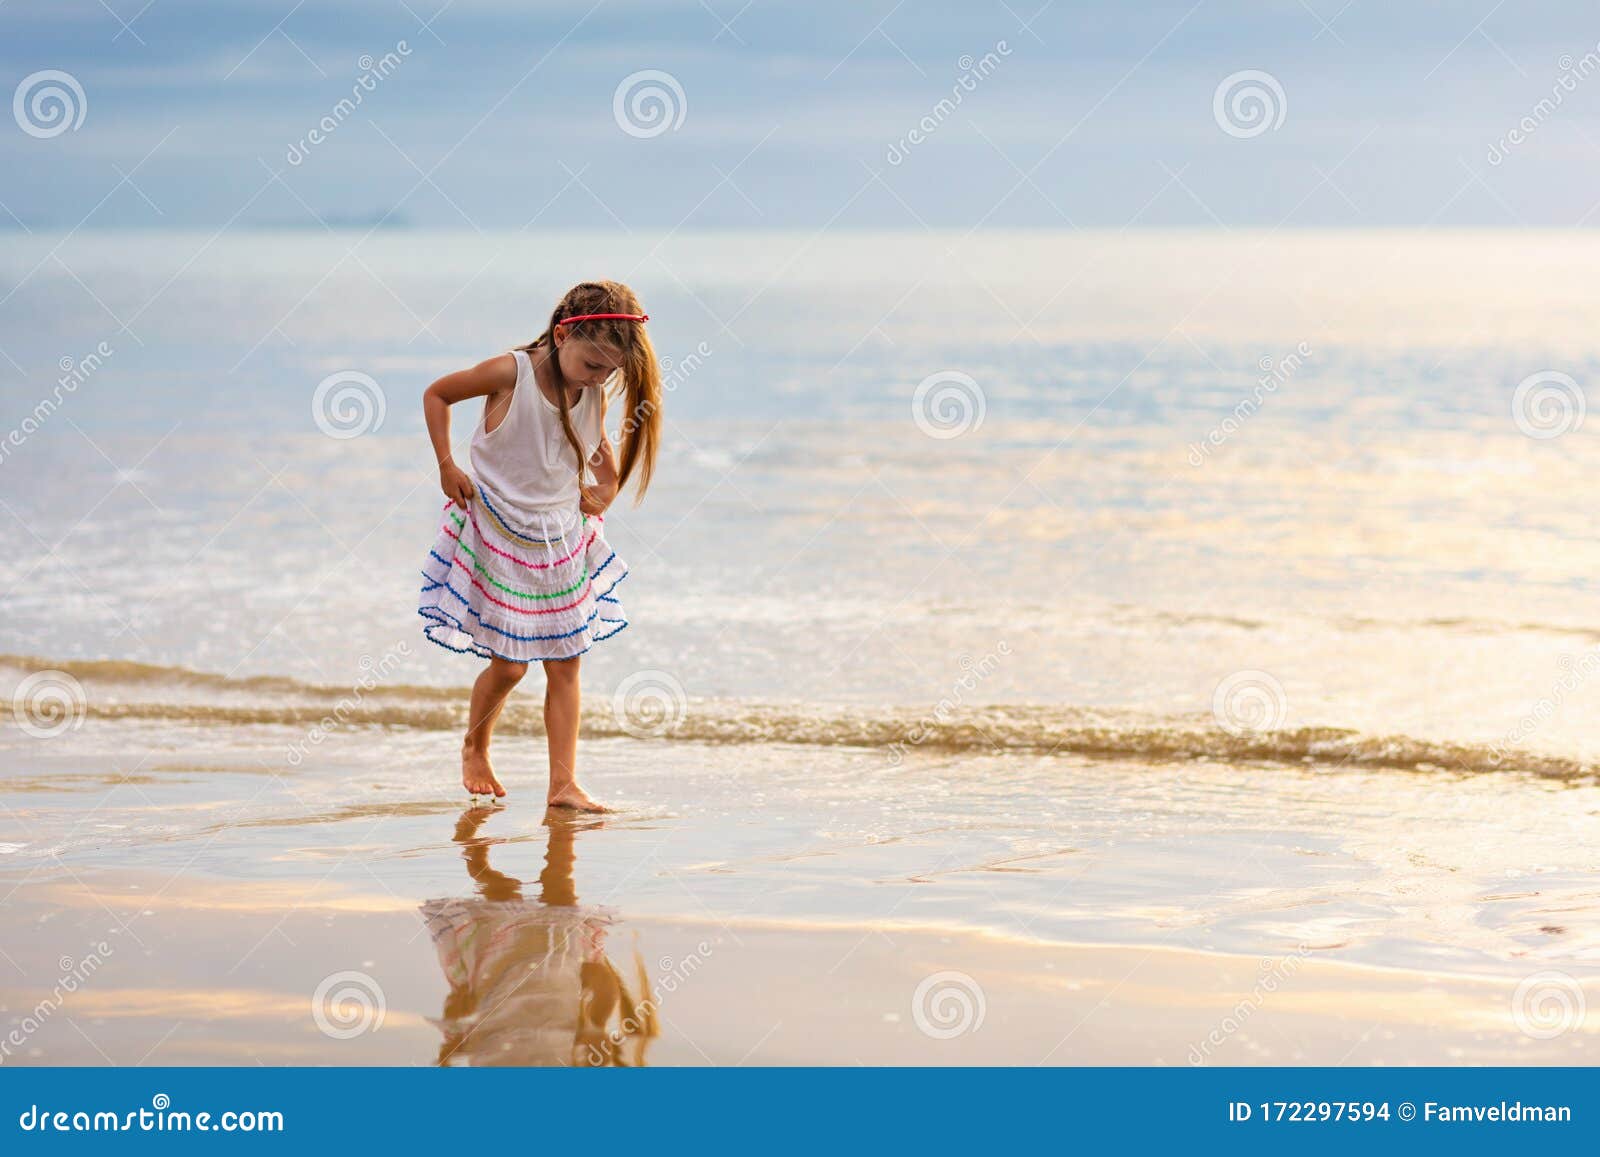 Child Playing on Ocean Beach. Kid at Sunset Sea Stock Photo - Image of ...